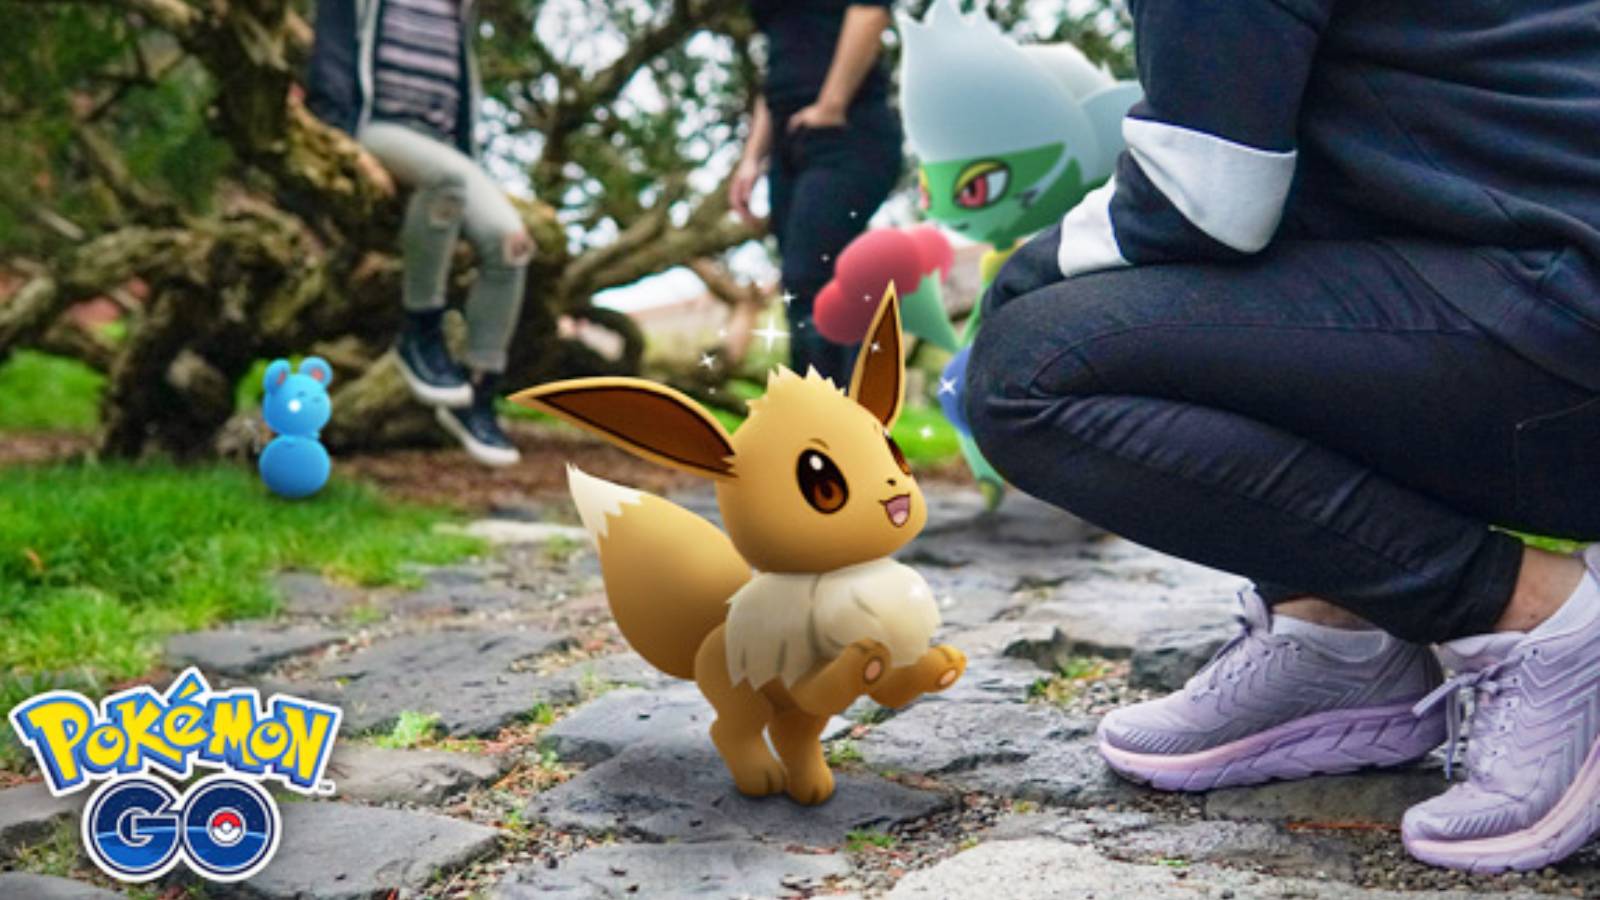 Promotional artwork for Pokemon Go shows a Trainer playing with an Eevee